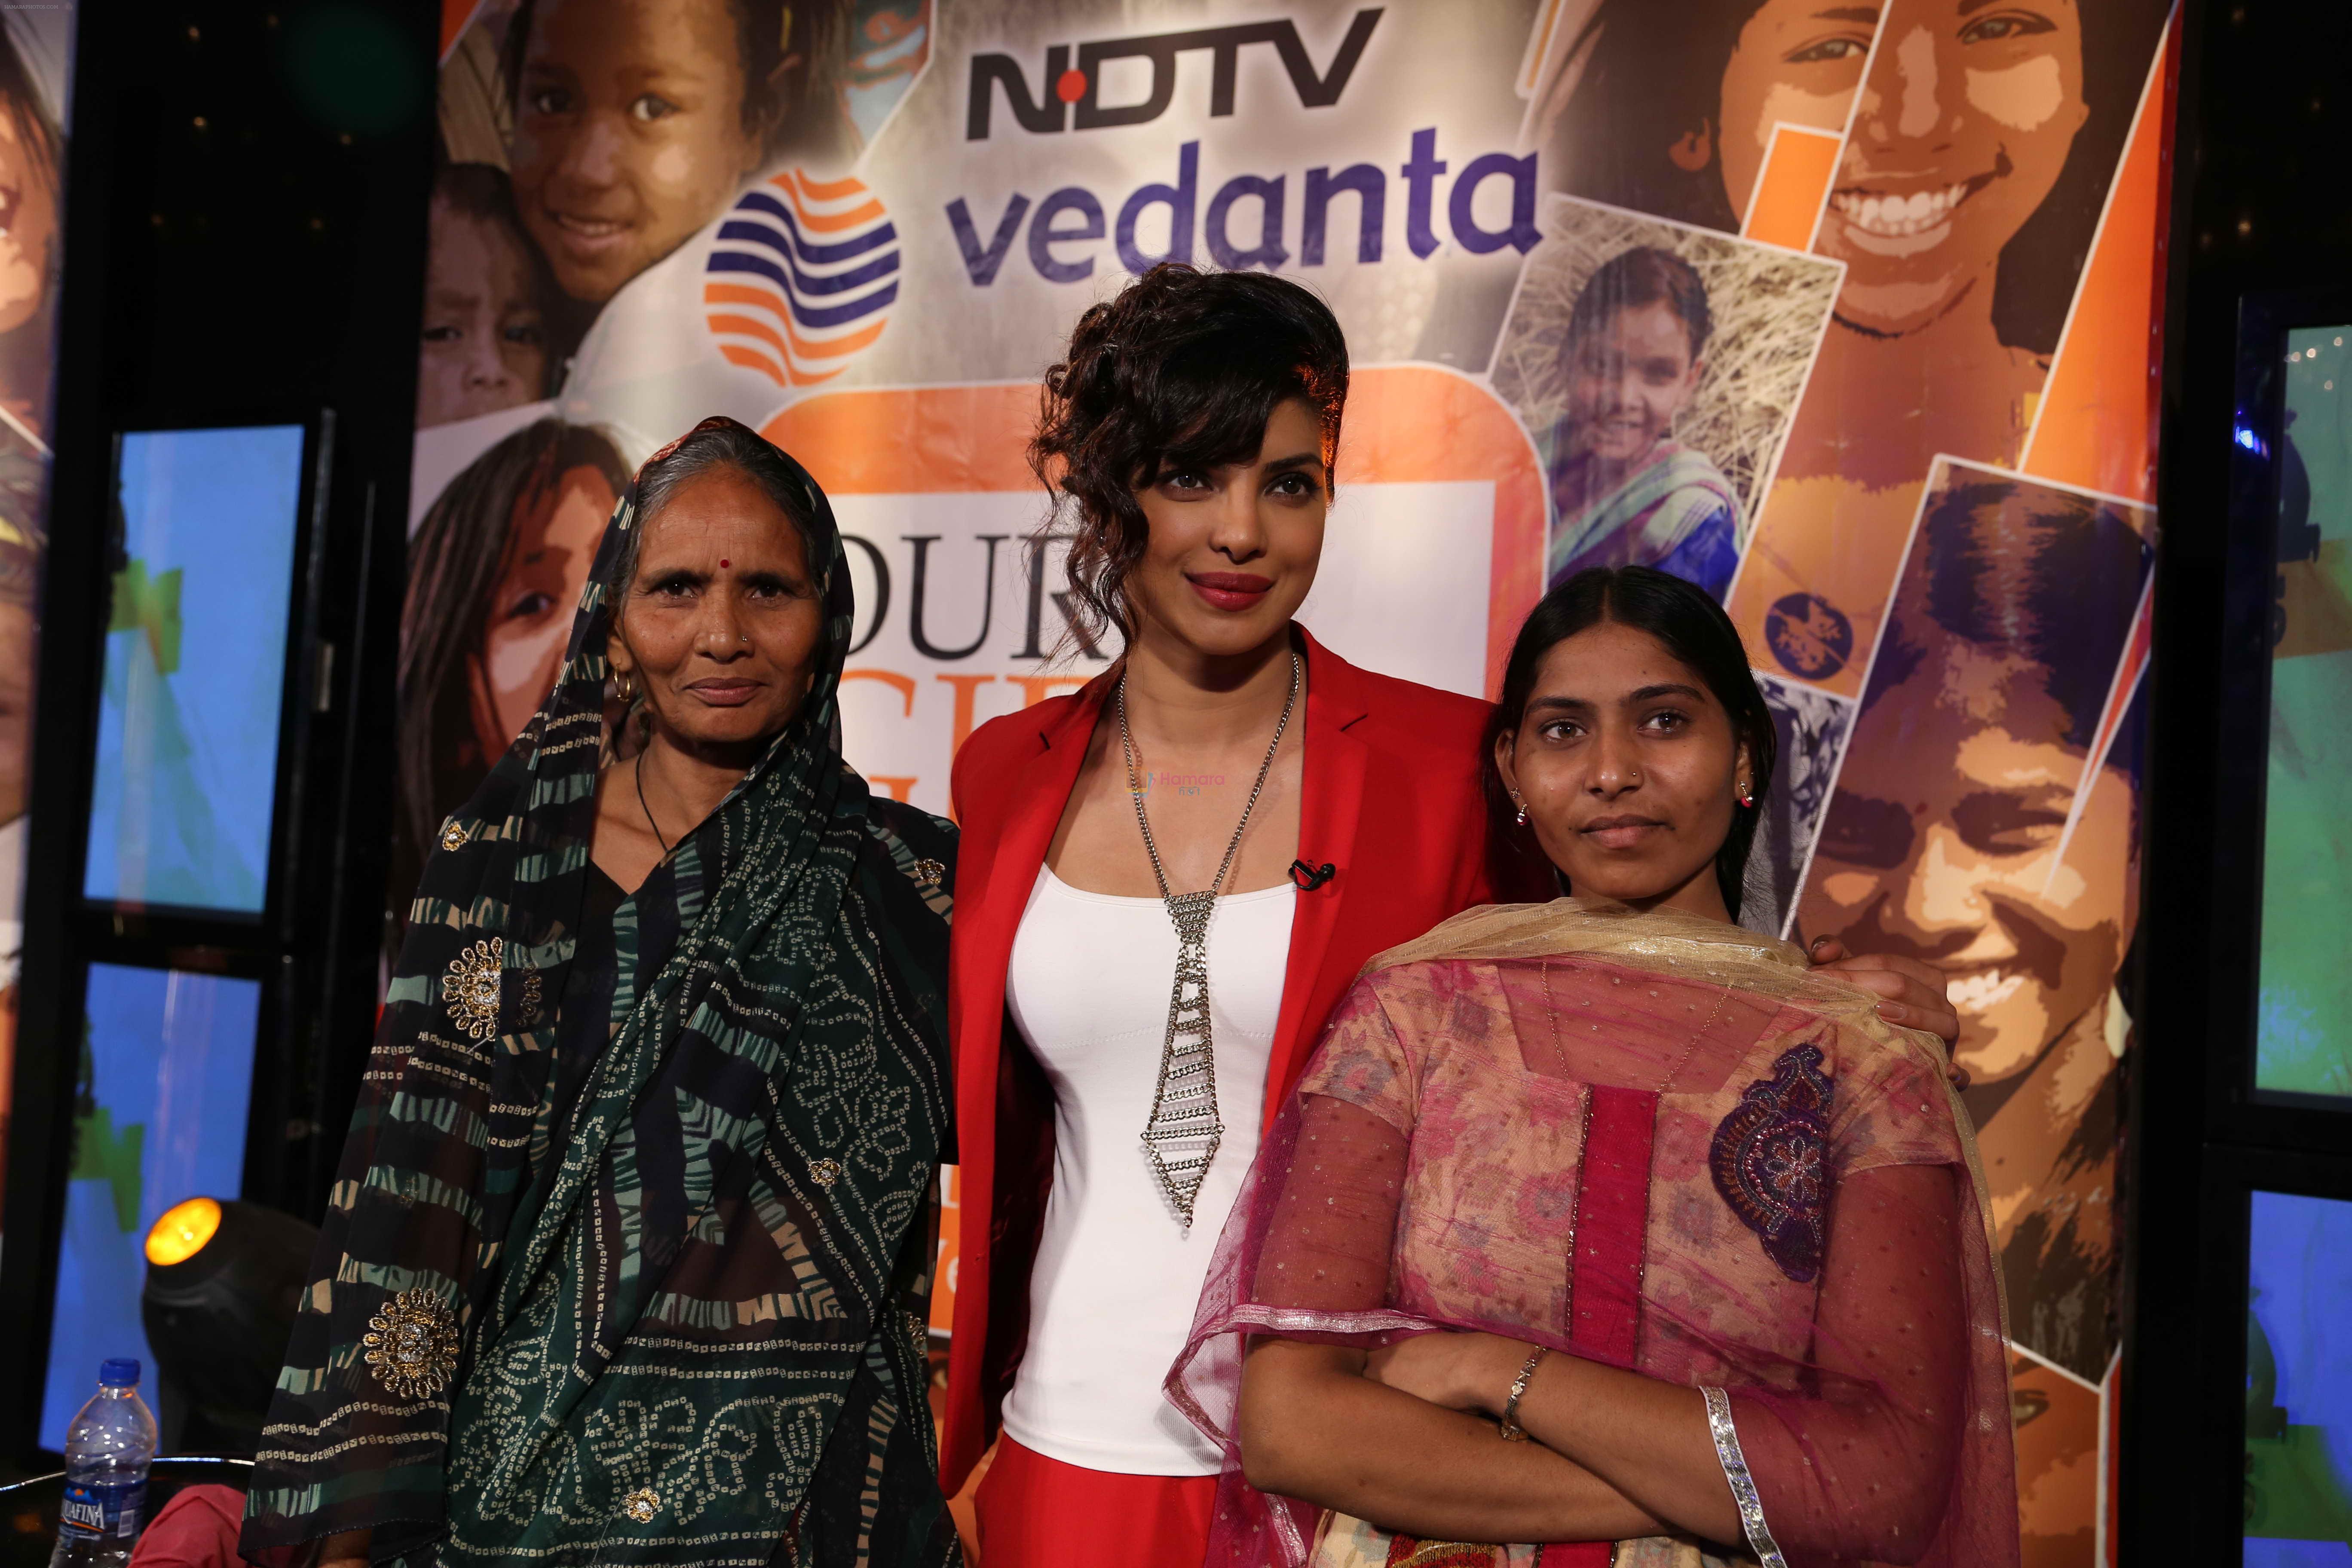 Priyanka Chopra at the NDTV Vedanta Our Girls Our Pride campaign on 19th Aug 2013